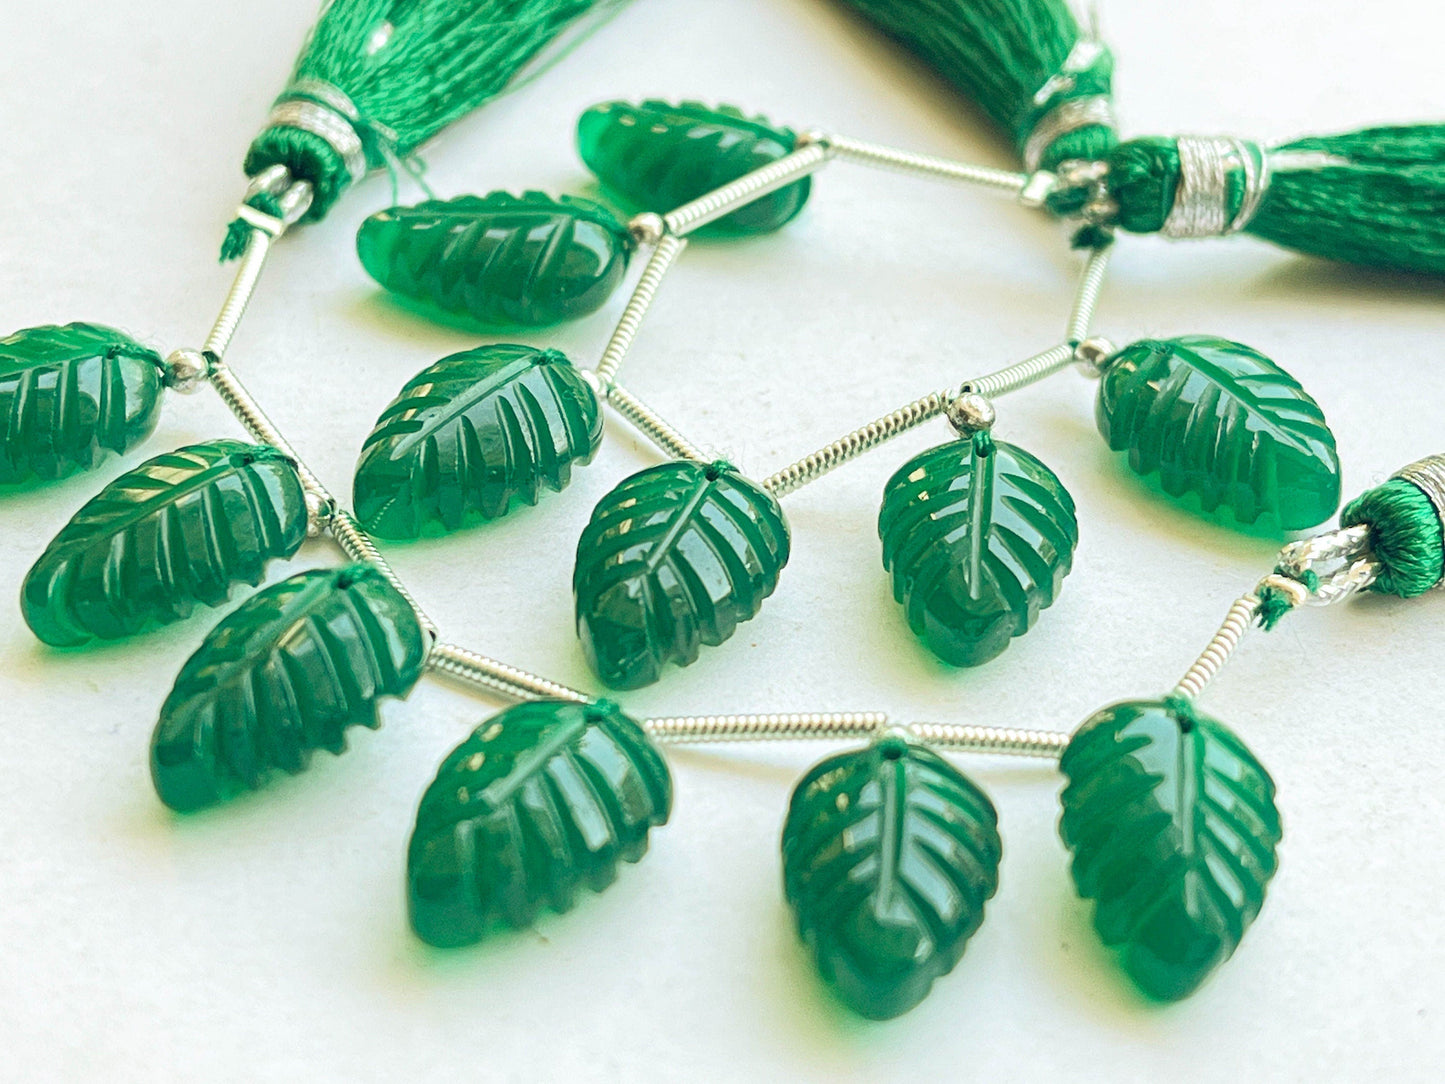 10 Pieces Green Onyx Leaf carved Beads Beadsforyourjewelry